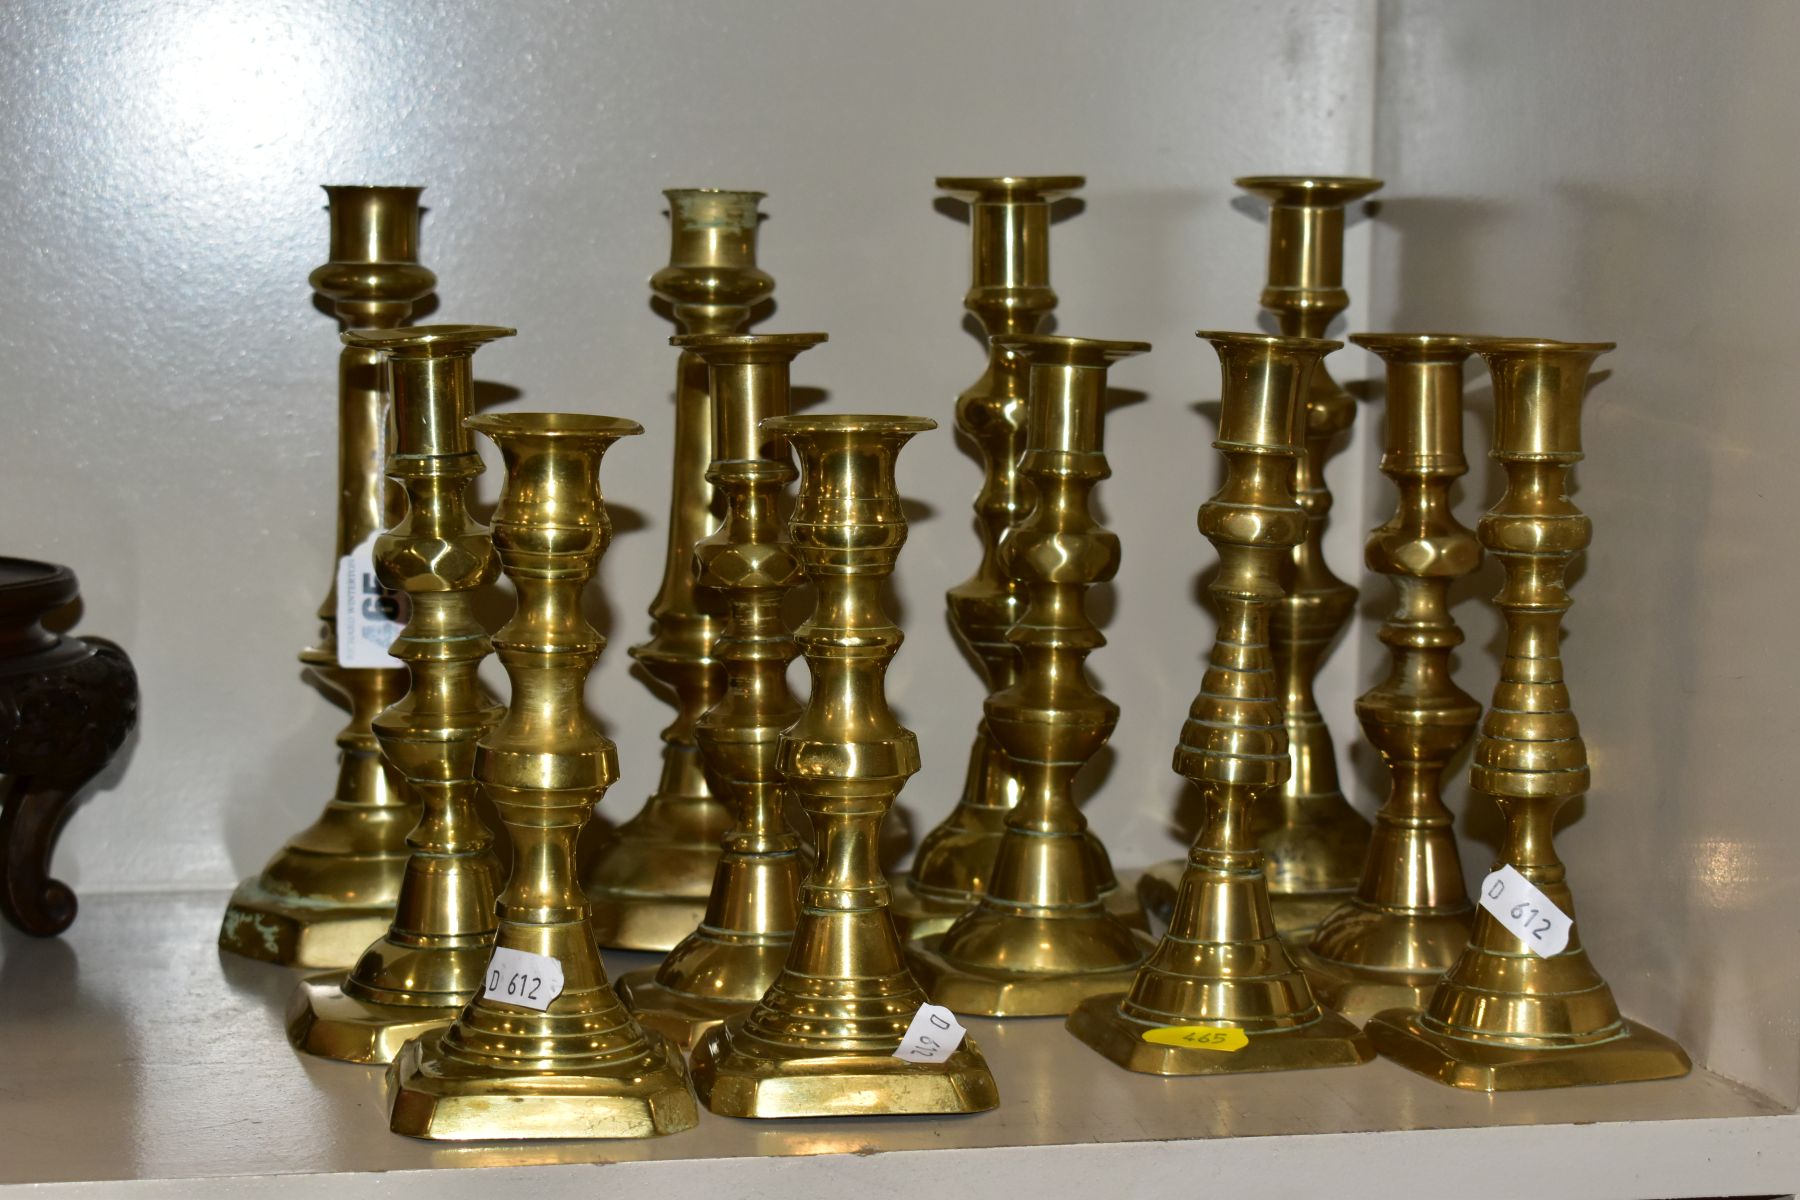 SIX PAIRS OF BRASS CANDLESTICKS, tallest height 22cm and smallest height 16cm, all fitted with